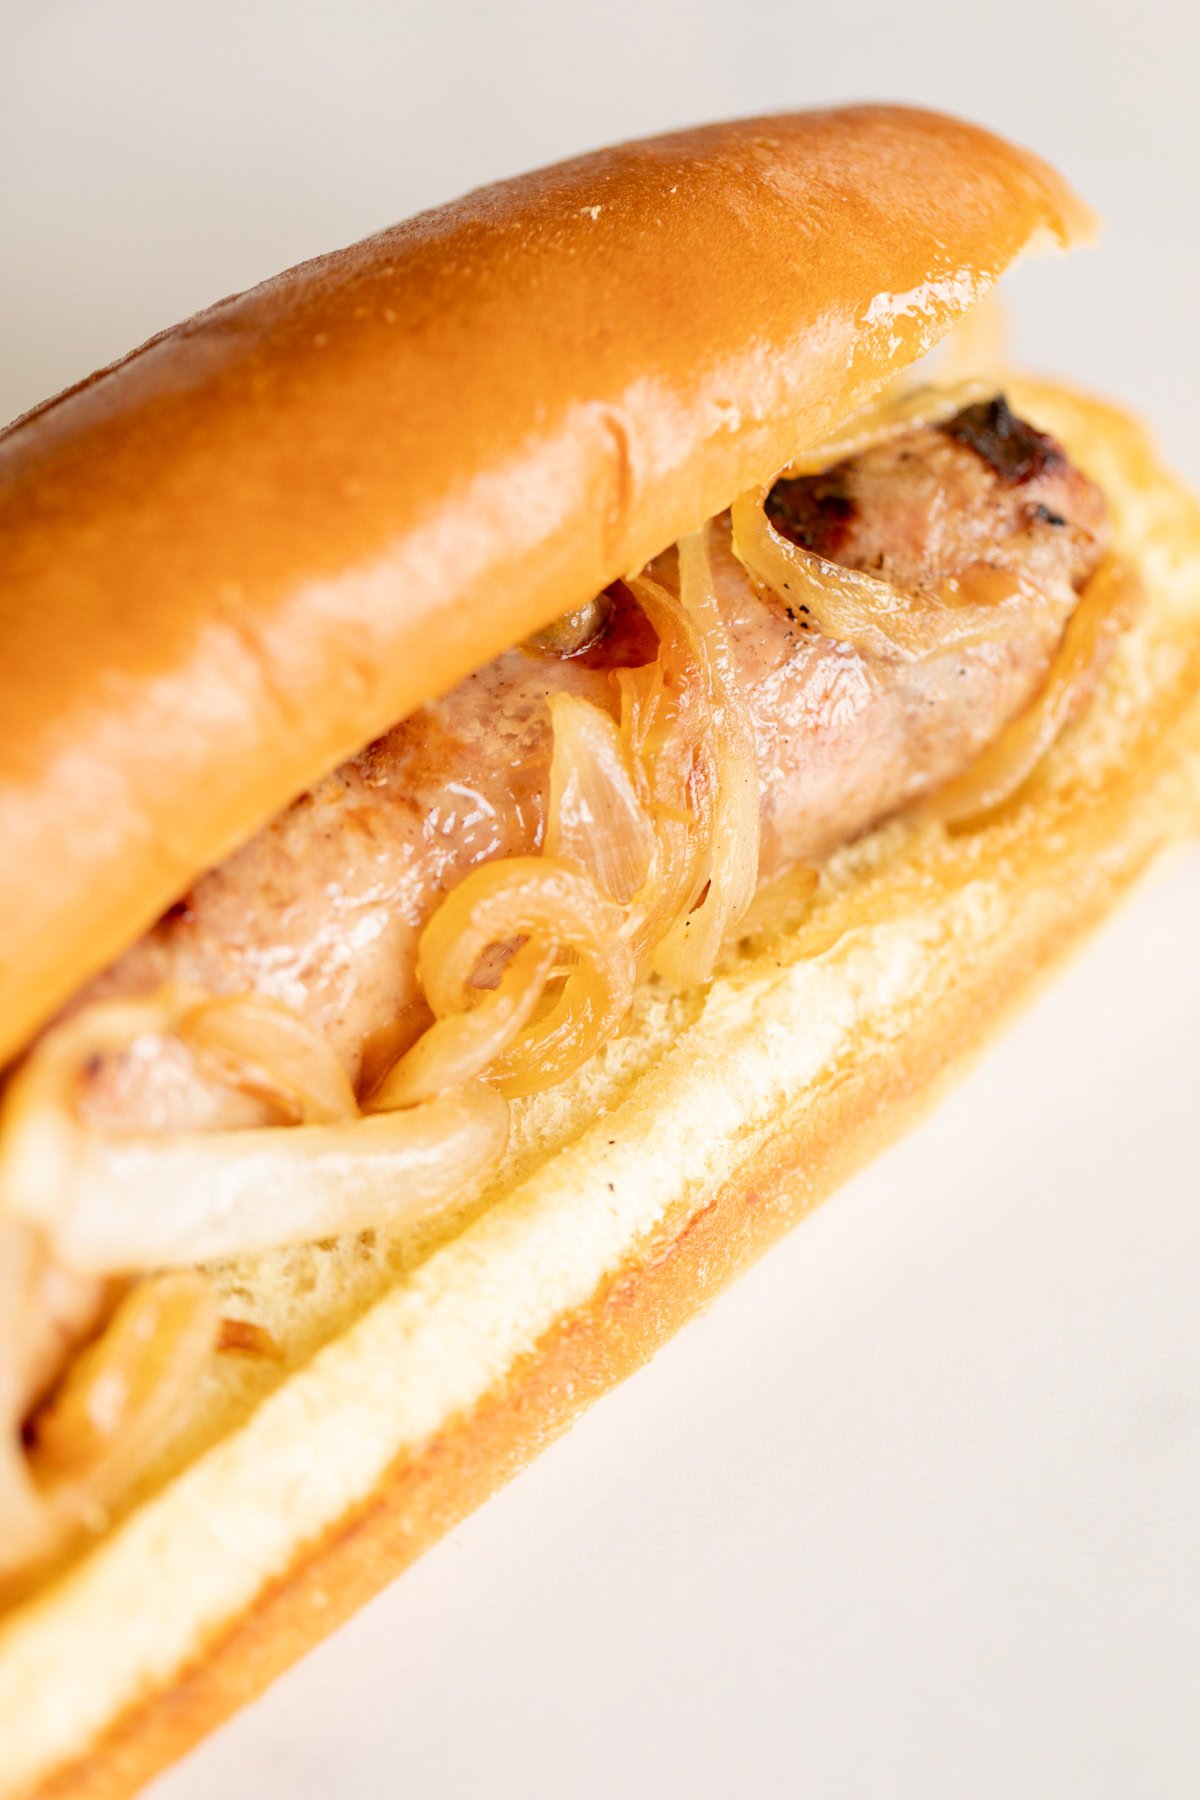 A sausage in a hot dog bun topped with caramelized onions on a white background showcases the art of cooking bratwurst.